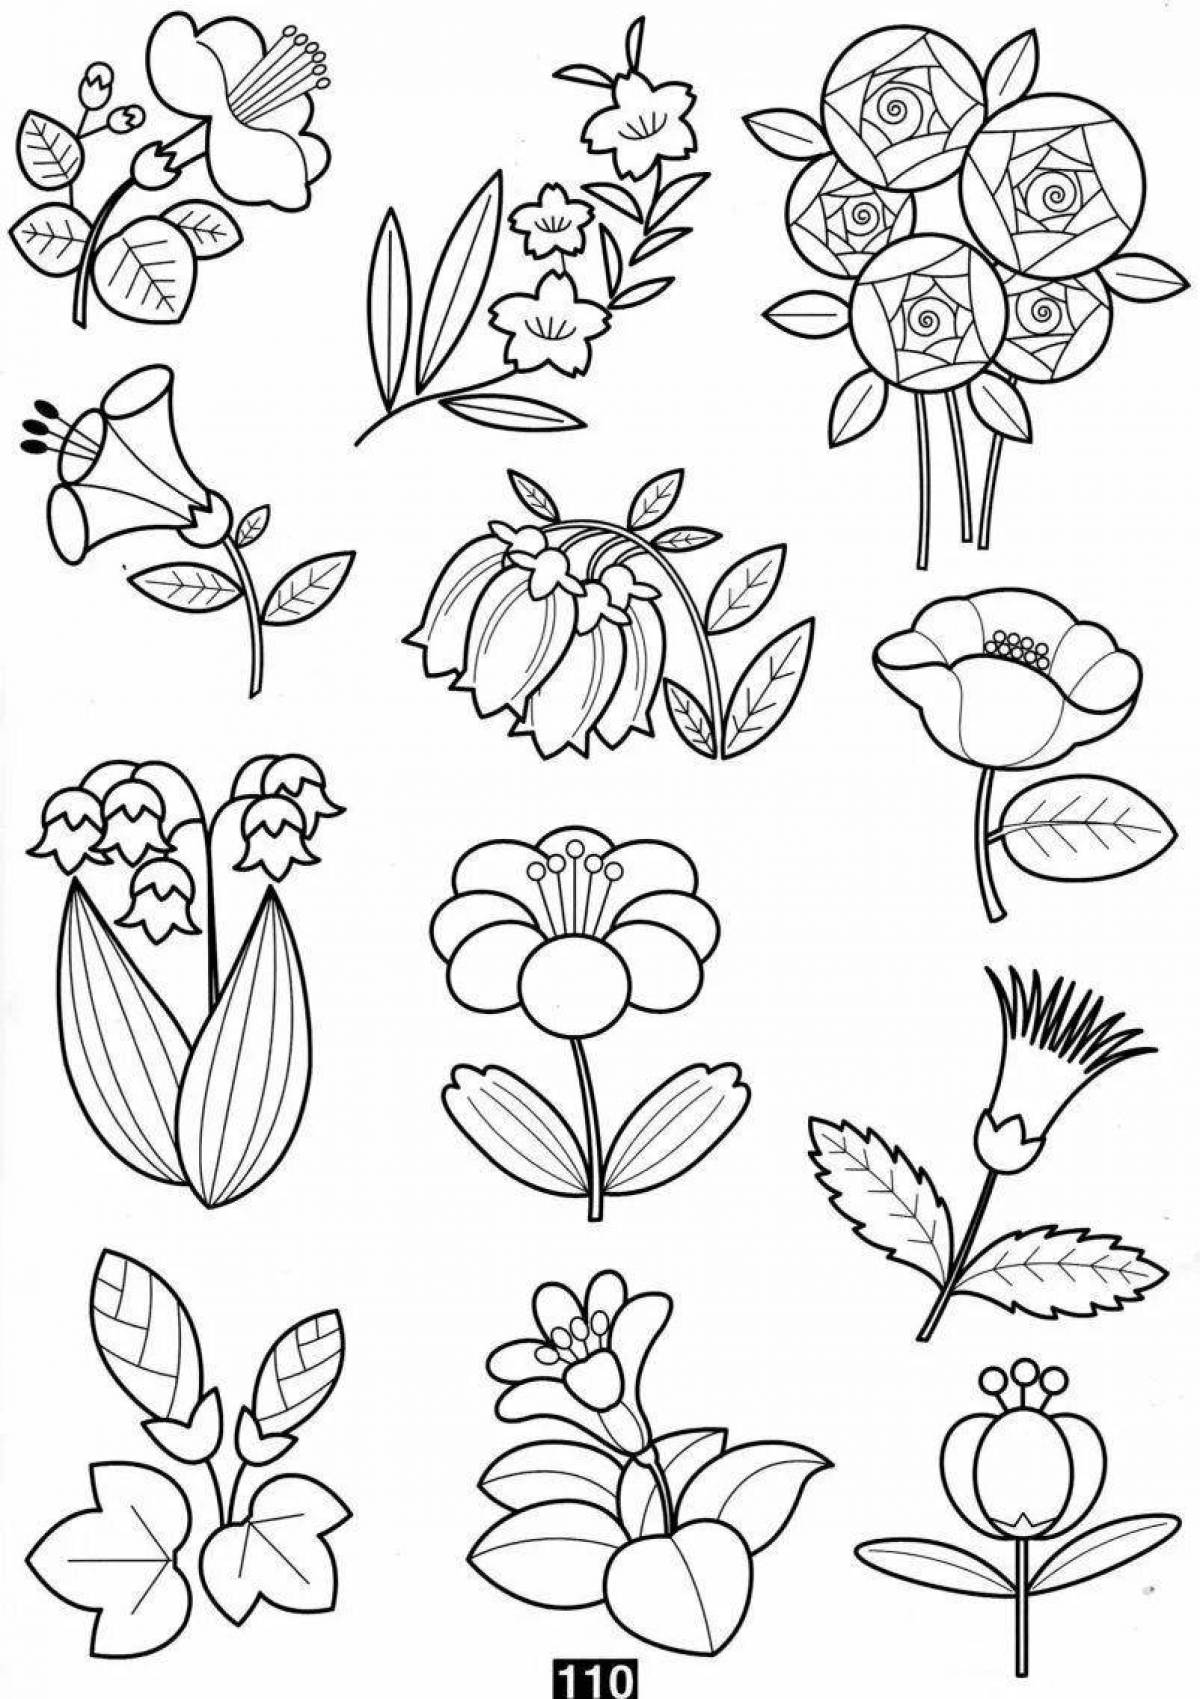 A lot of exciting little coloring pages